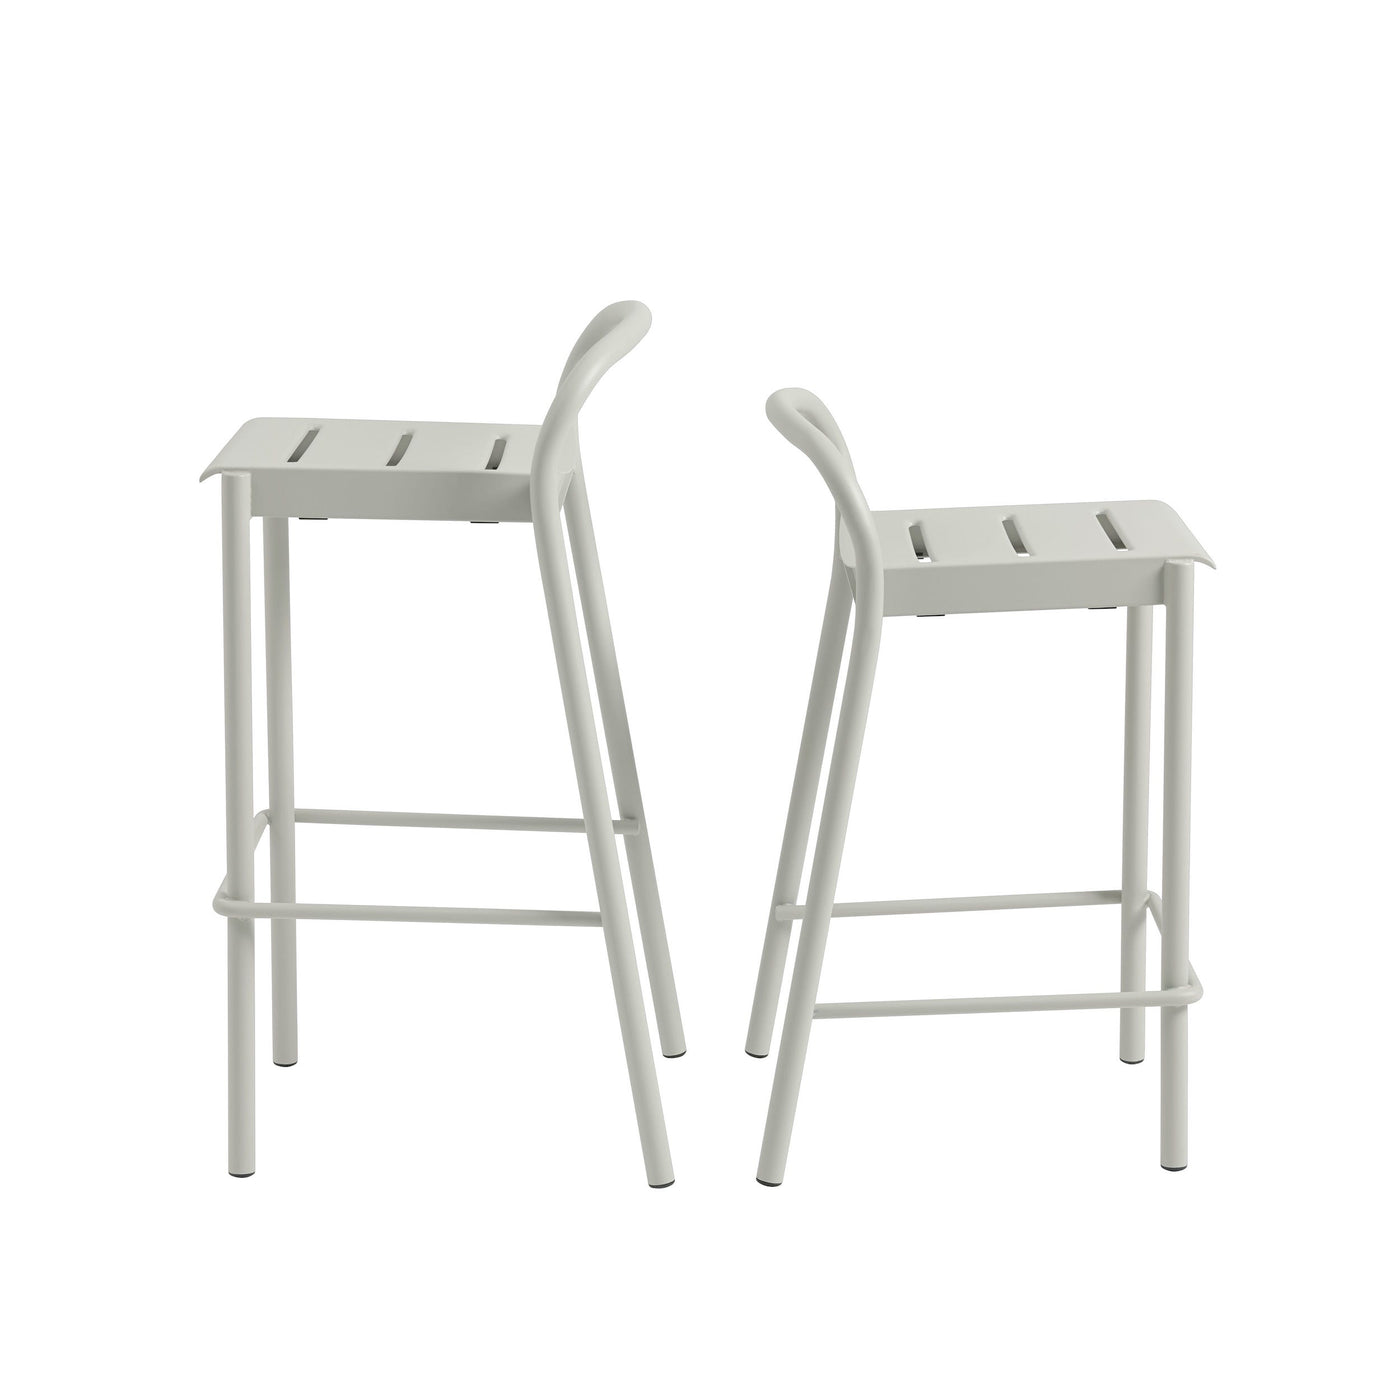 Muuto Linear Steel Counter Stool. Shop outdoor furniture at someday designs. #colour_grey